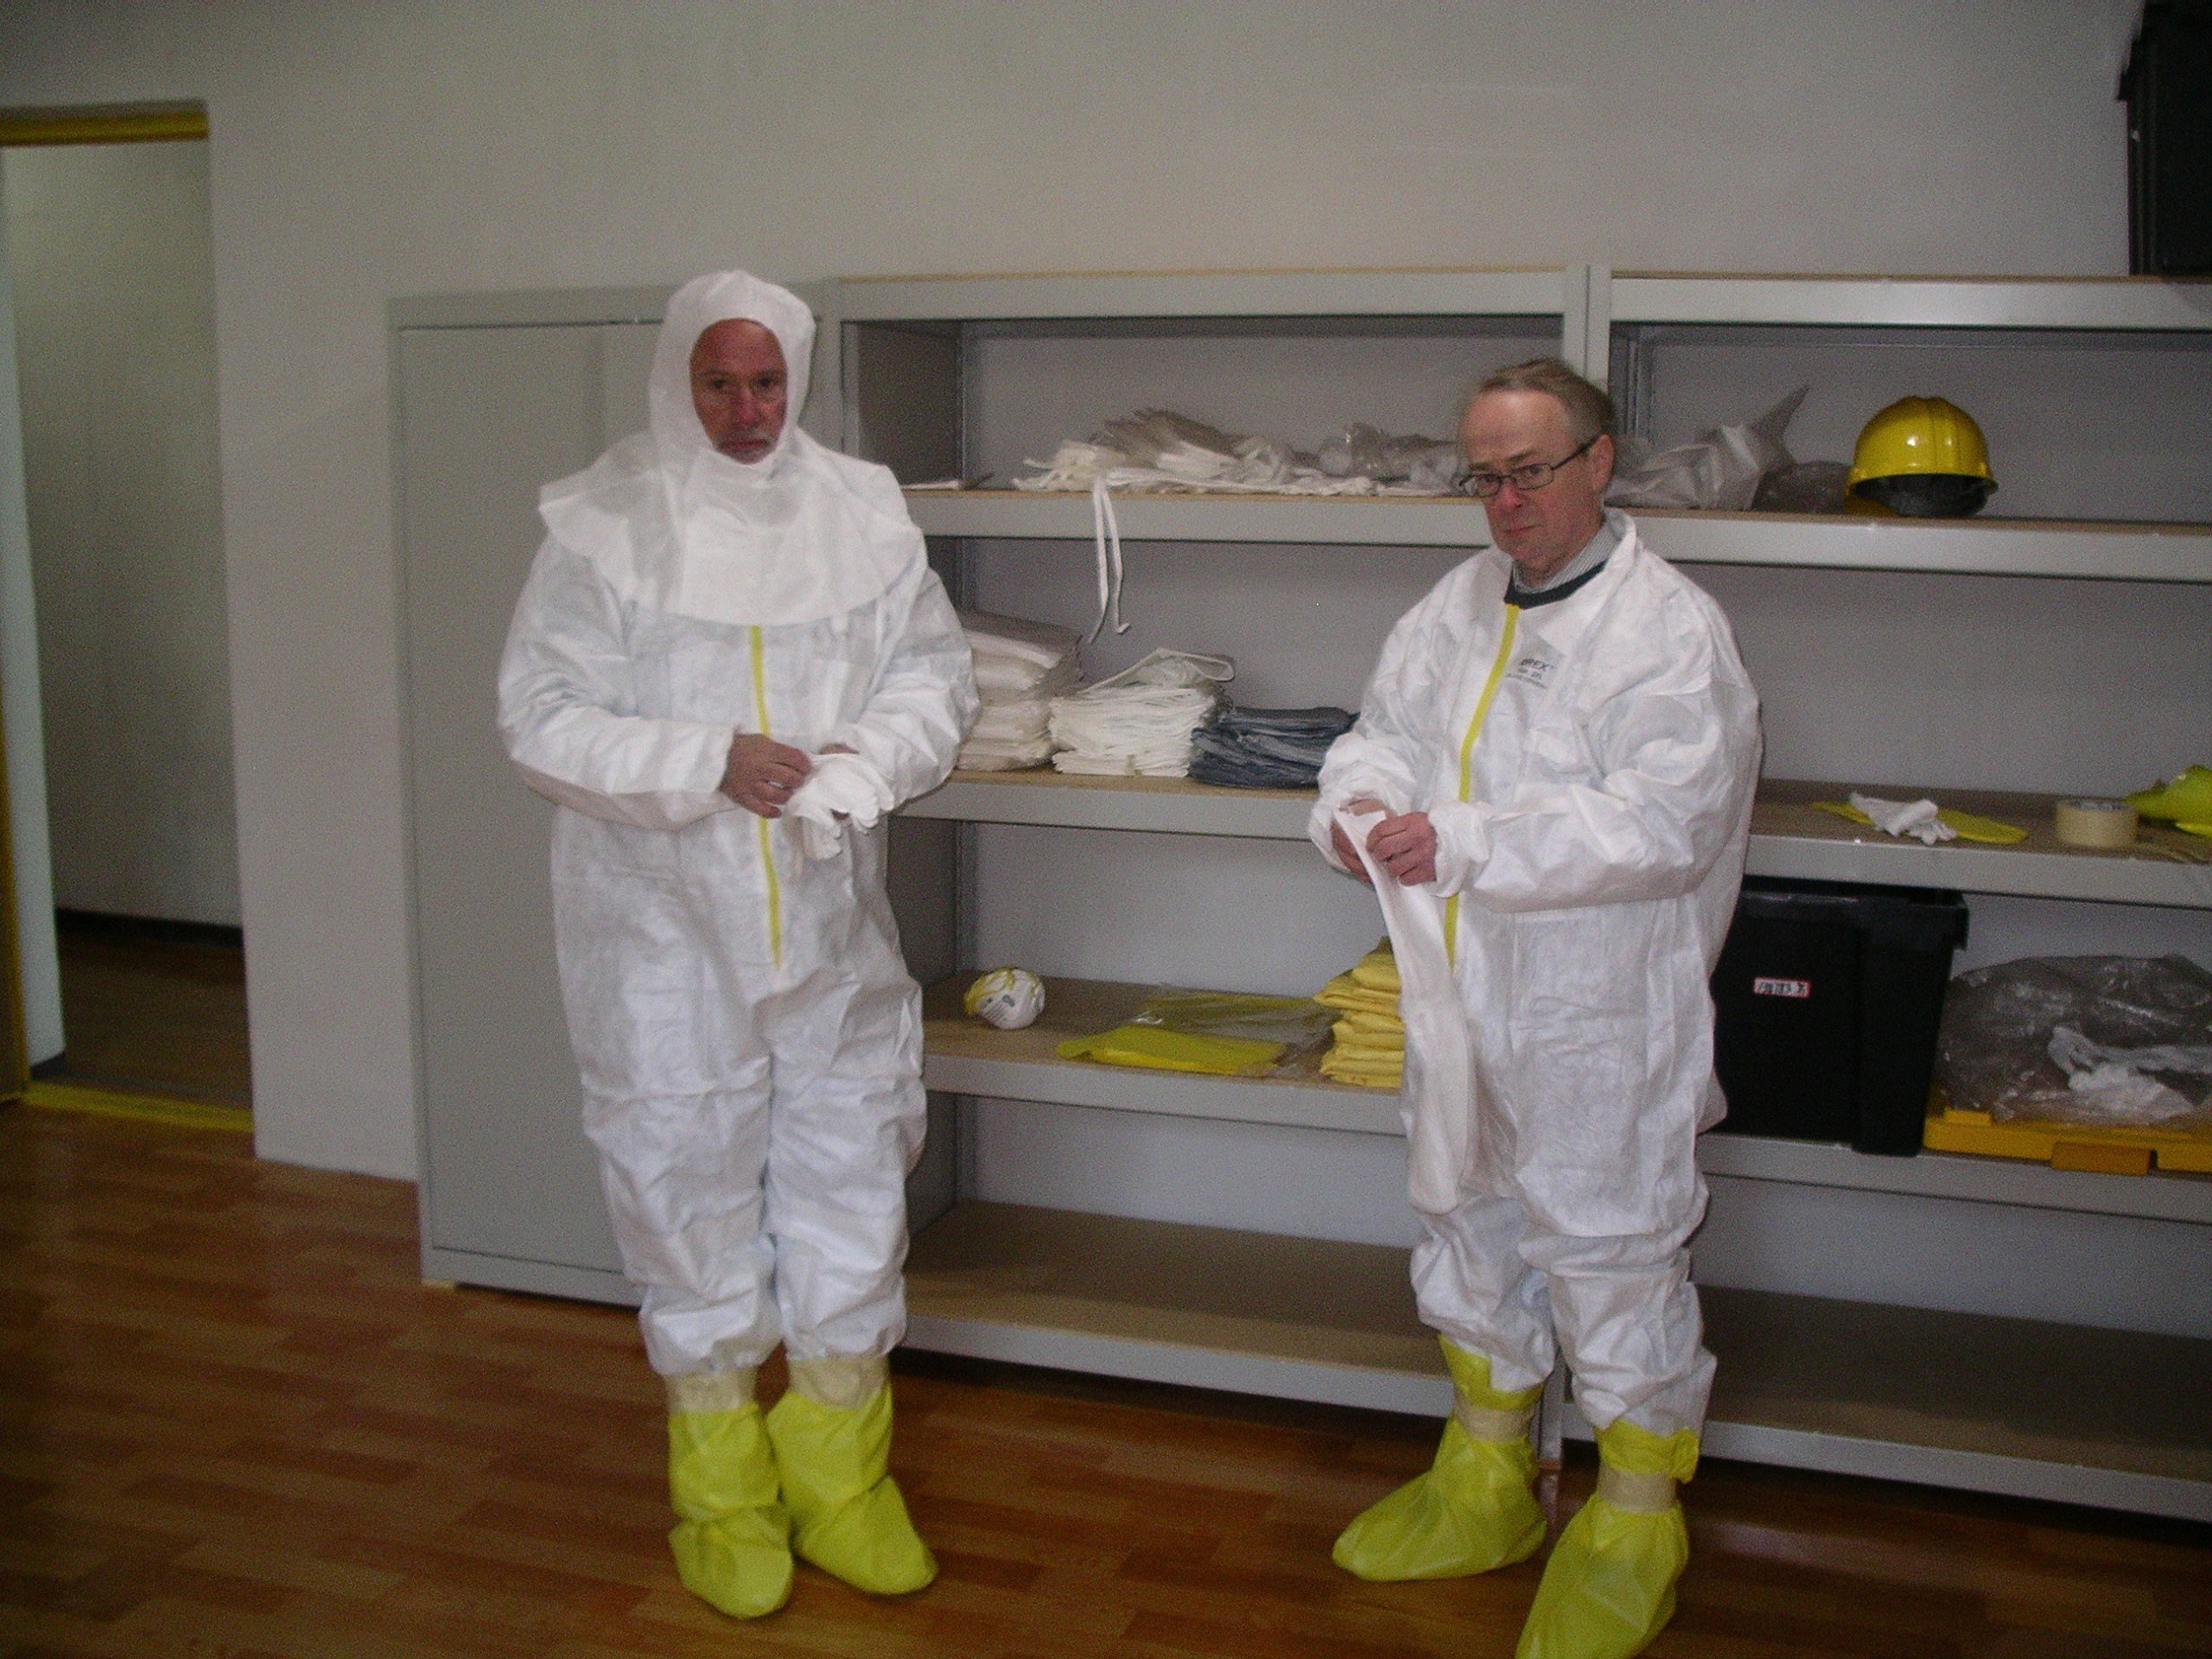 Two men donning white anti-contamination suits and wearing yellow plastic booties